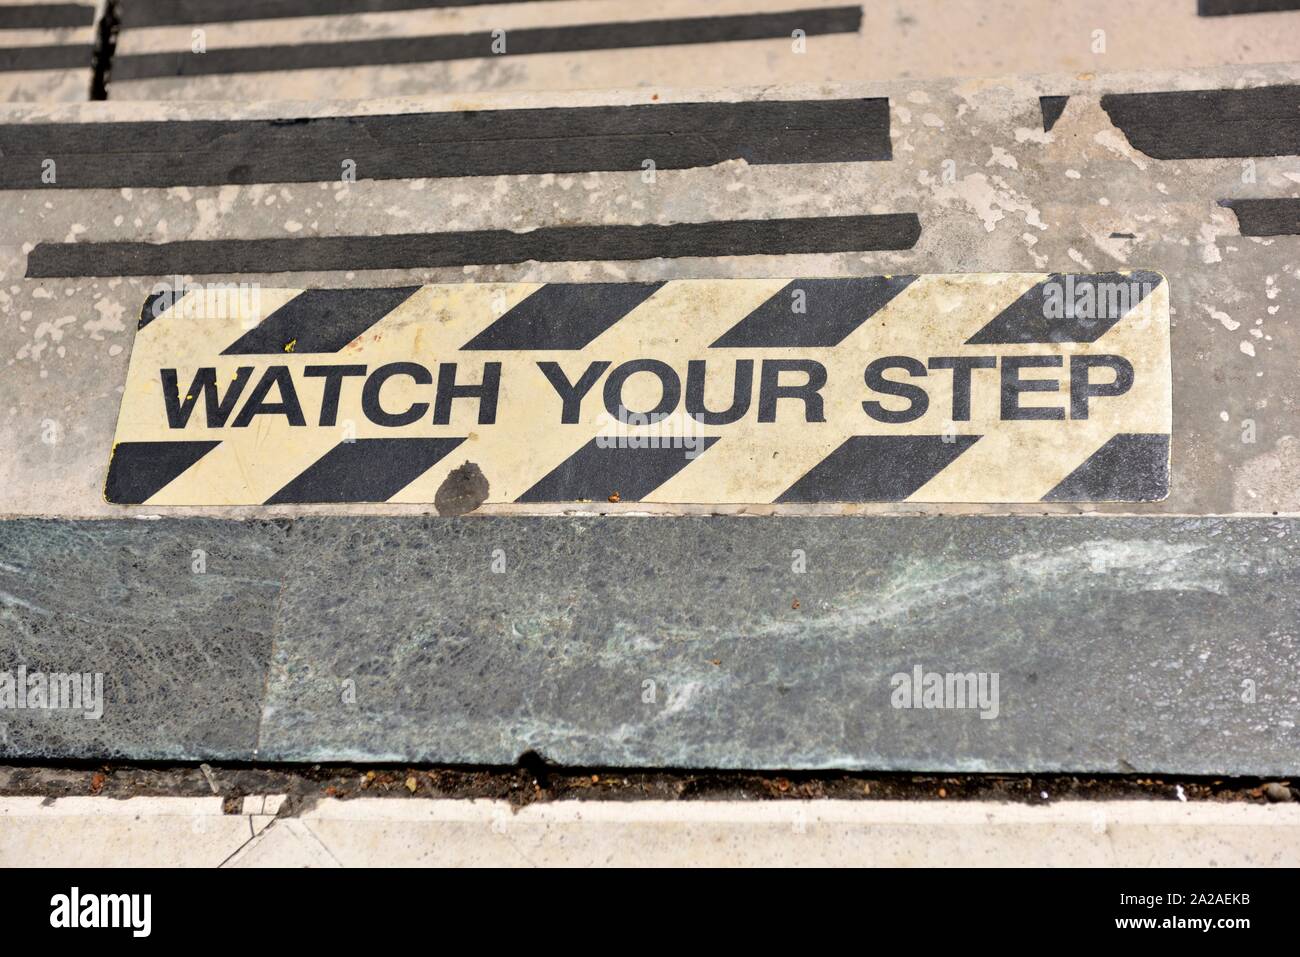 watch your step,warning sign on damaged worn steps Stock Photo